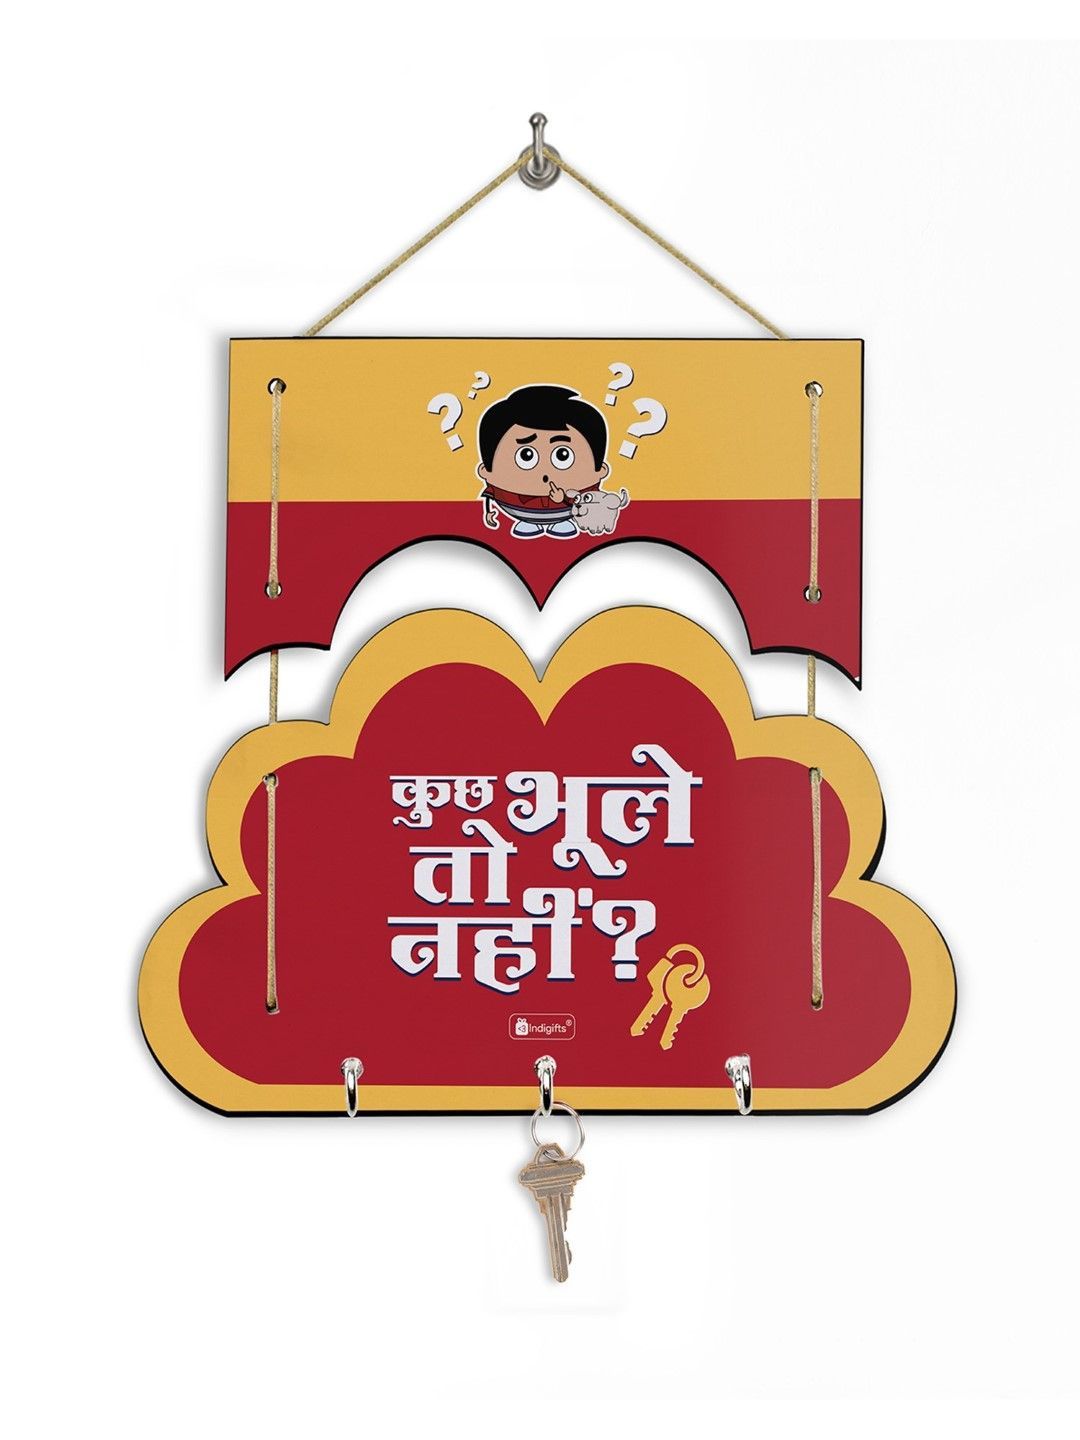 Indigift Gift Hamper for Decoration Cloud Design Decorative Wooden Wall Hanging and Shubh Labh Door Hanging Shubh Labh Wall Hanging Unique Shubh Labh Wall Decor Hanging Cloud Shape Wall Hanging